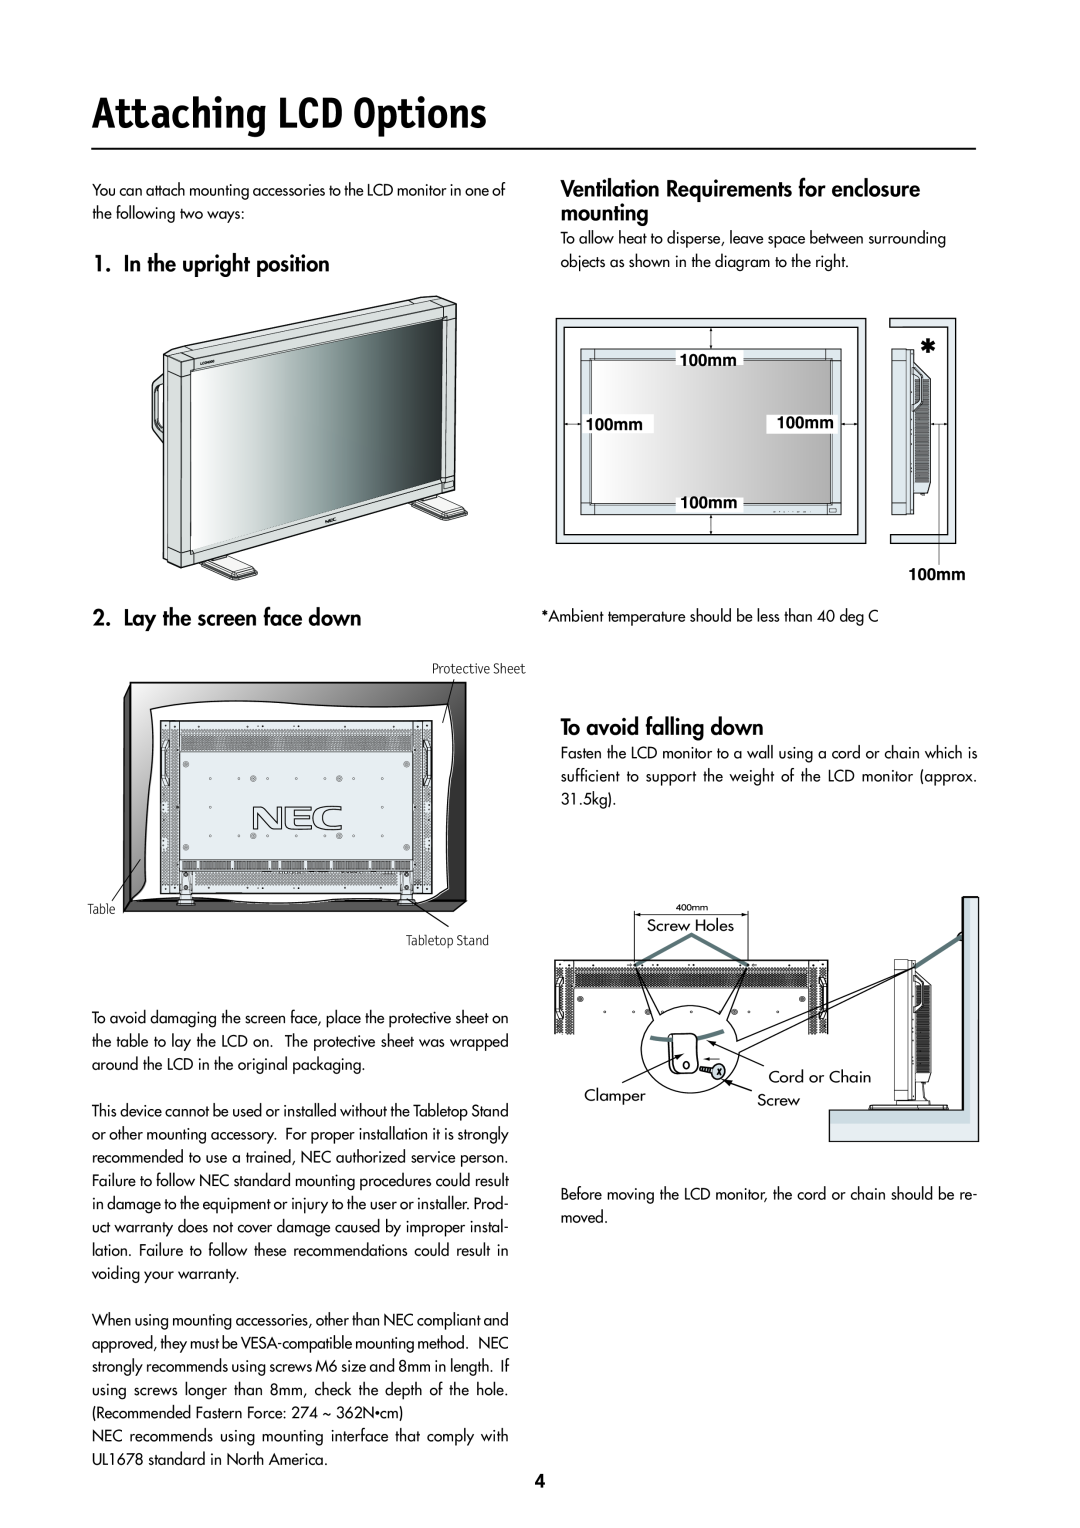 NEC LCD4000 manual Attaching LCD Options, Lay the screen face down, Ambient temperature should be less than 40 deg C 